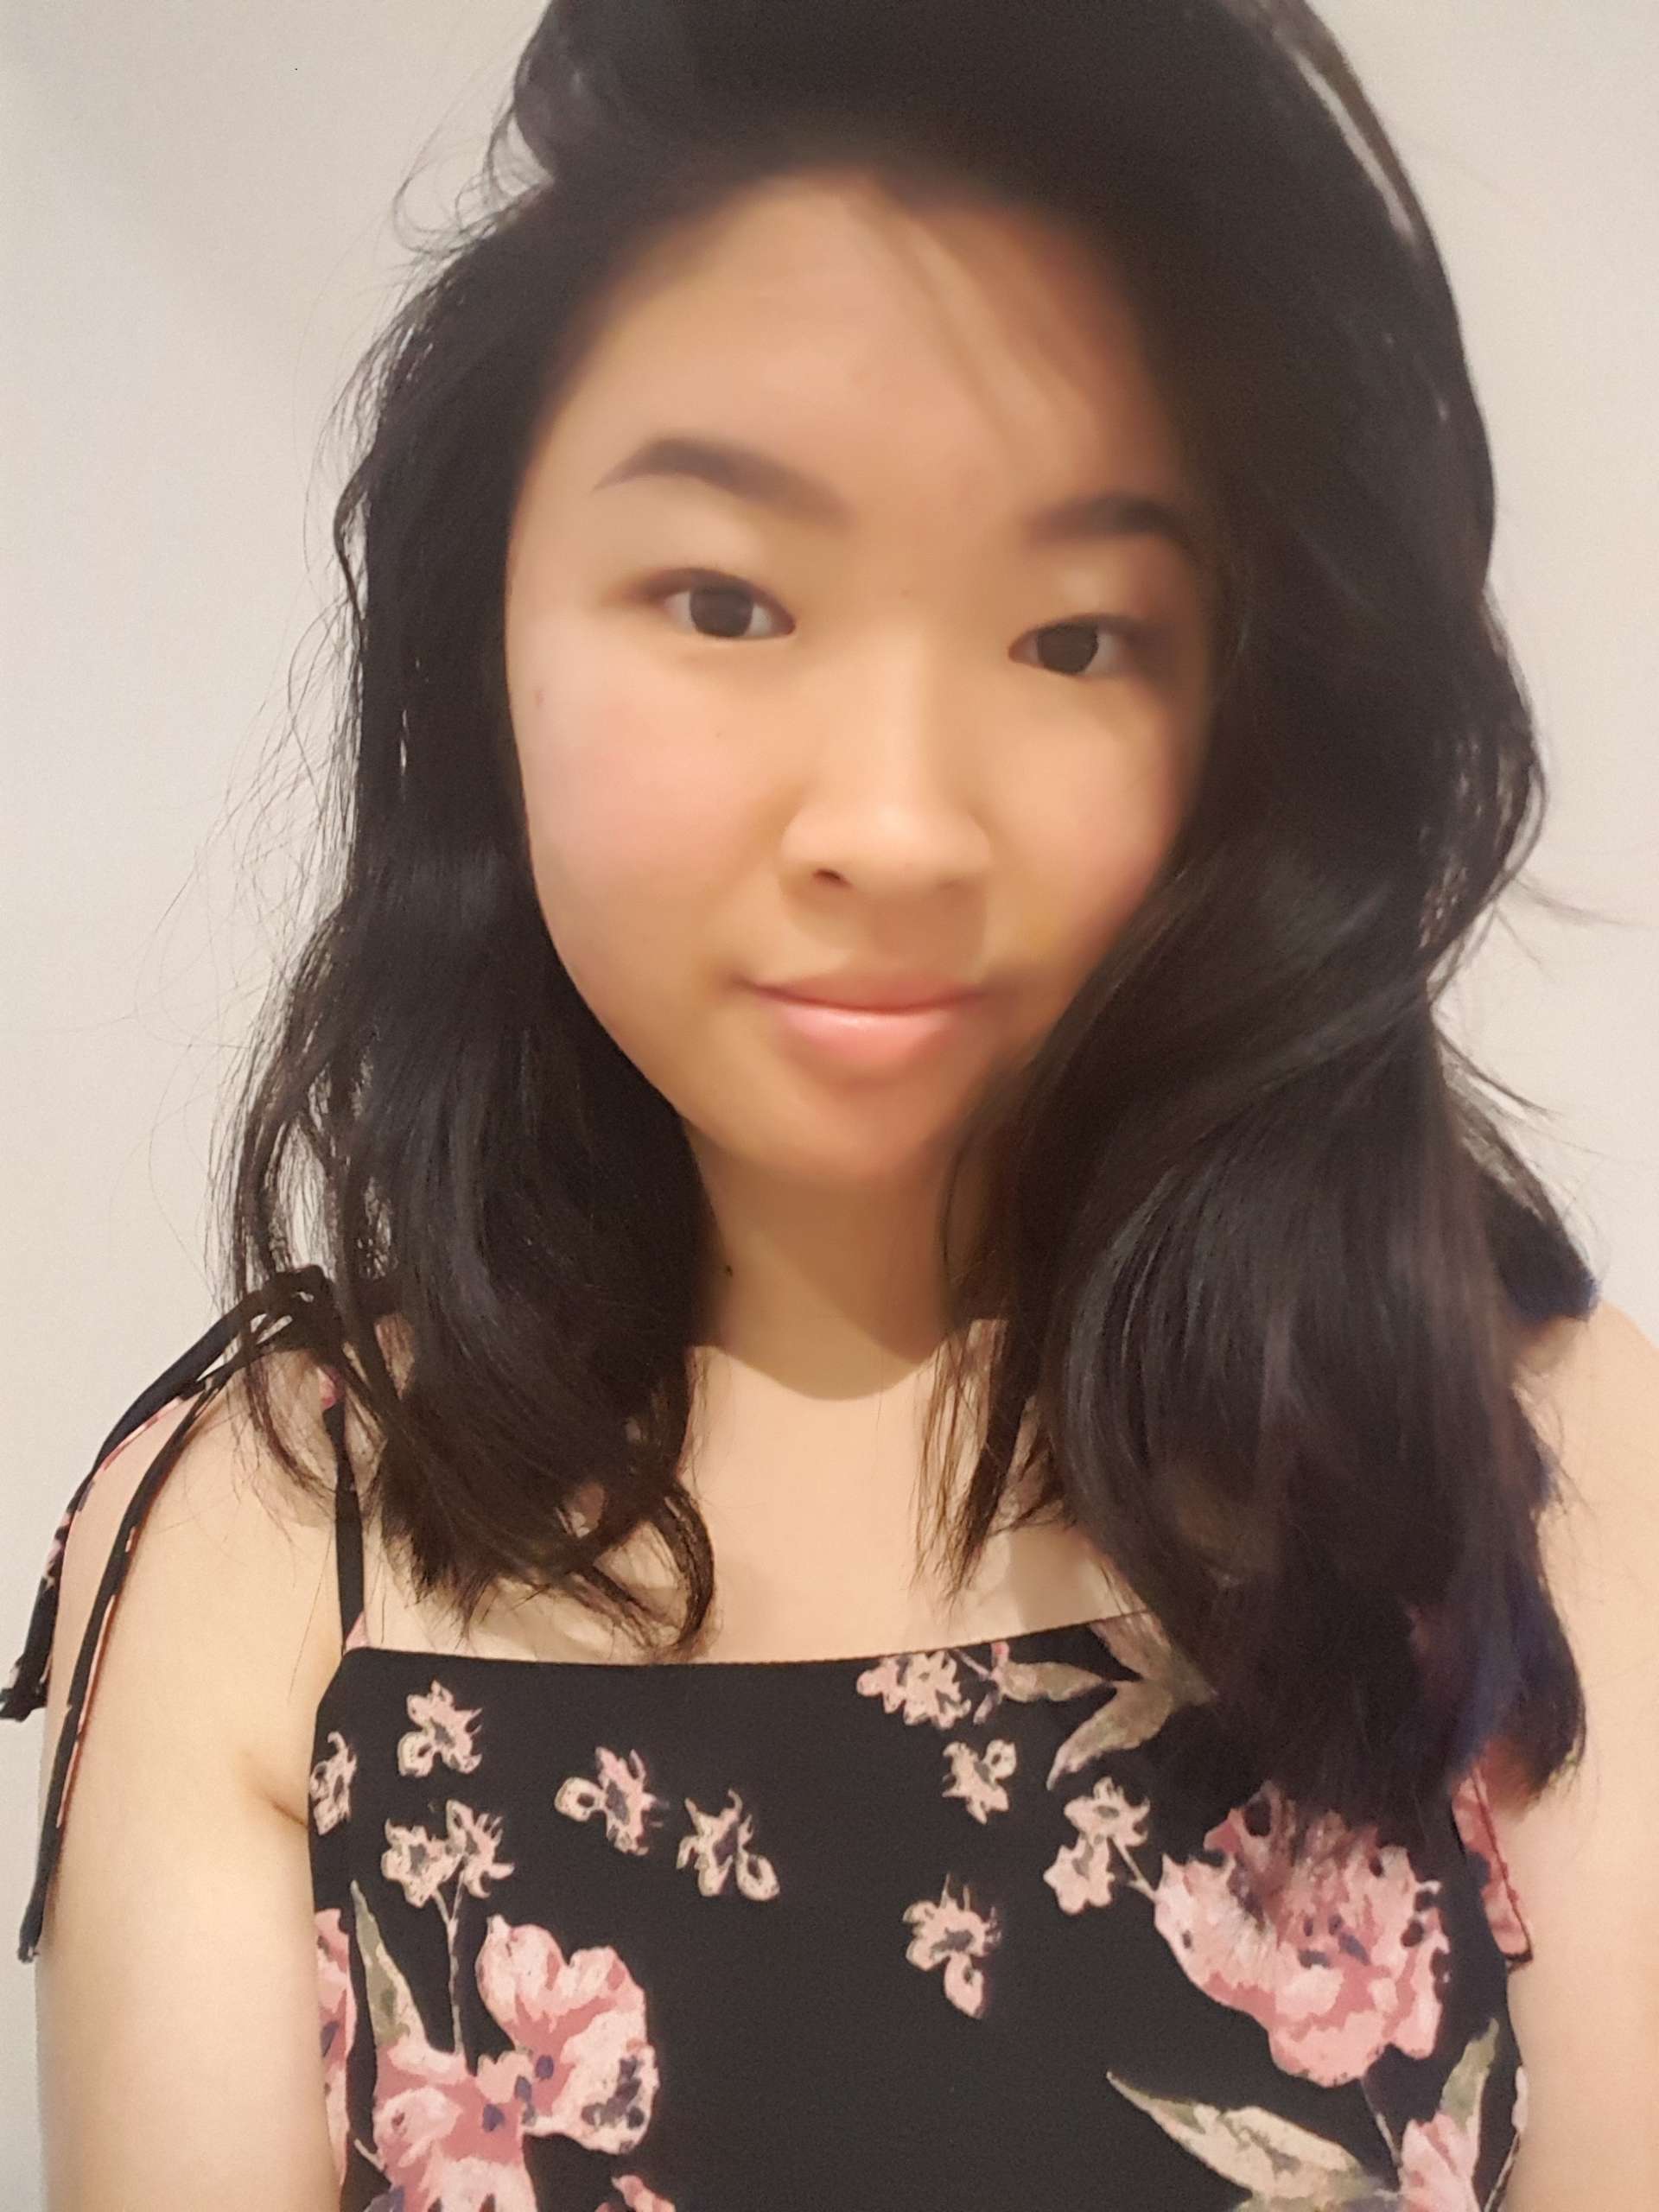 Writer, Christy Tan, weaing a black top with pink and green flowers. They are facing front on with long dark wavy hair parted on the right hand side.